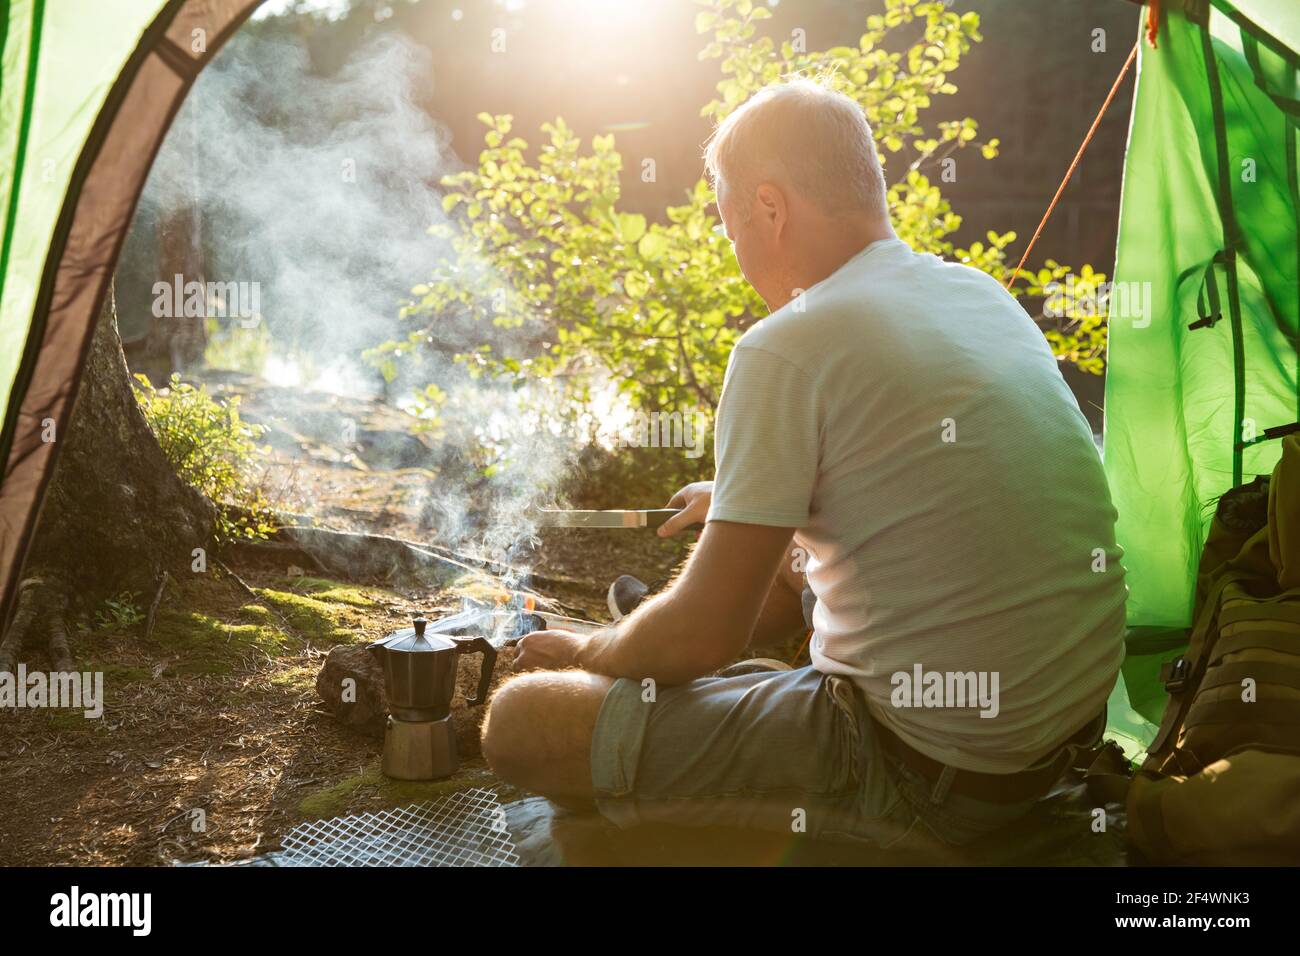 Man making coffee using espresso maker on campfire in forest on shore of a lake, sitting in tent, making a fire, grilling. Happy isolation concept. Stock Photo